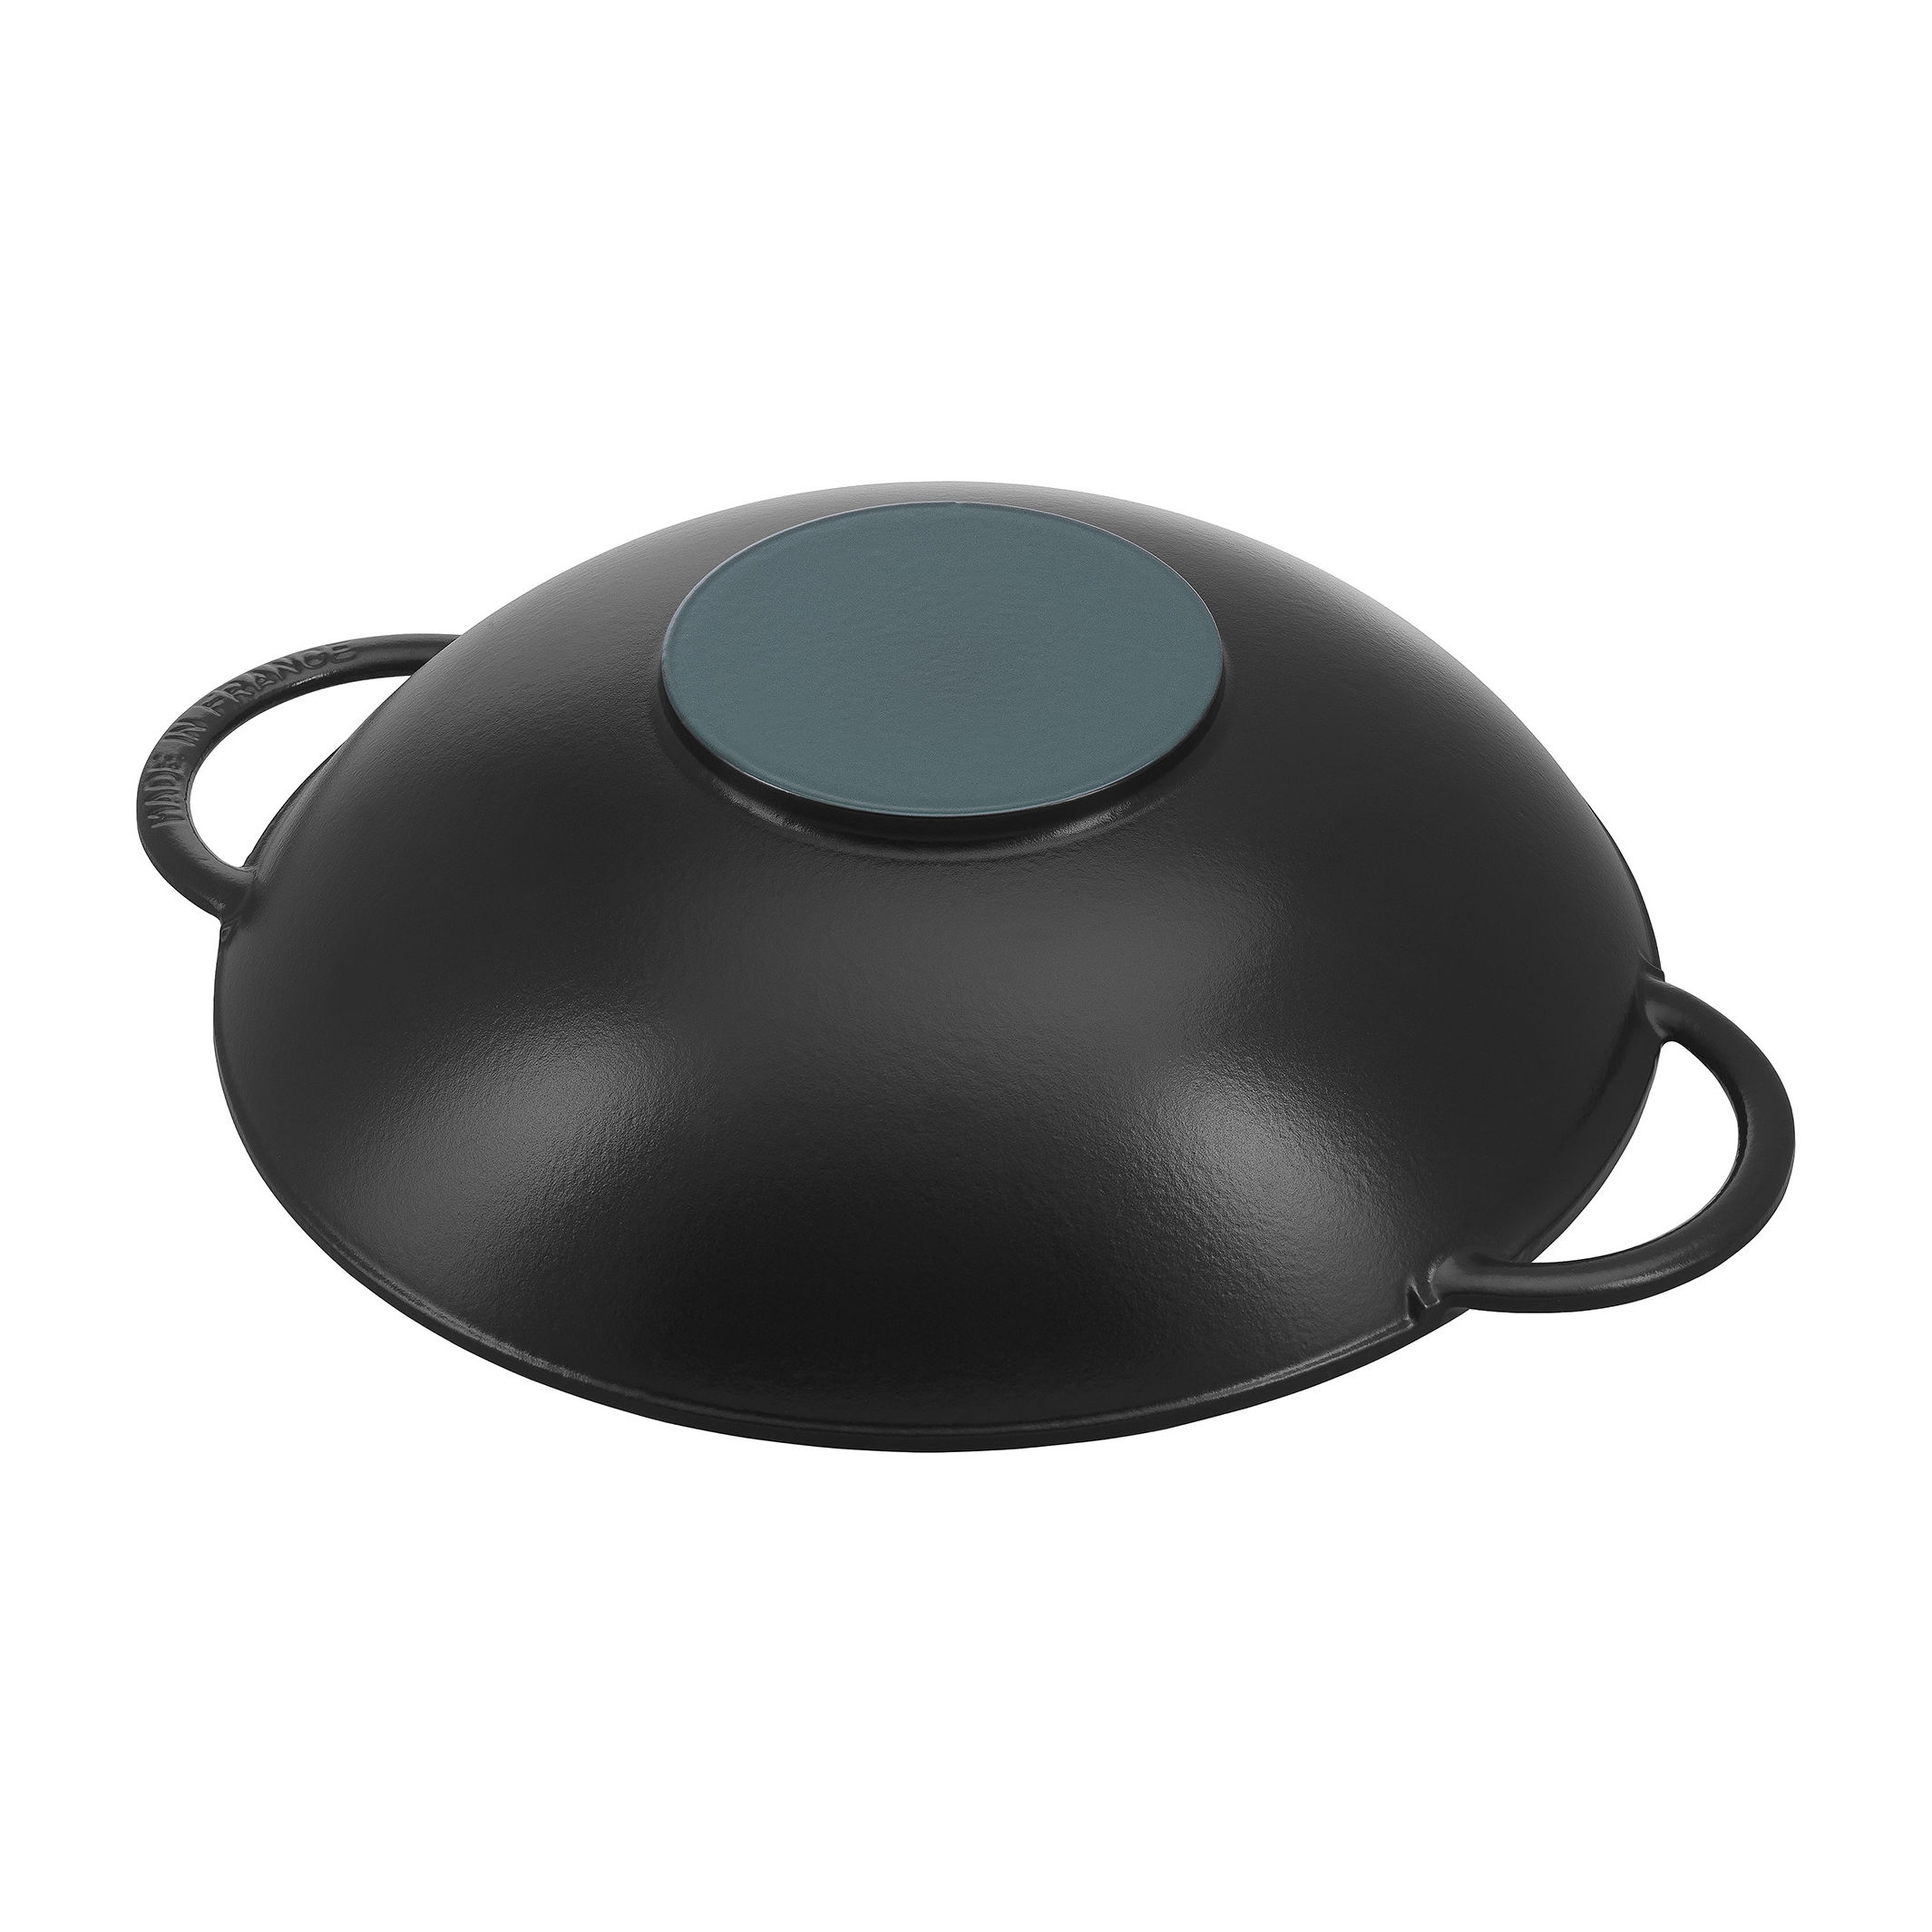 Online-Shop - Buy Wok with glass lid